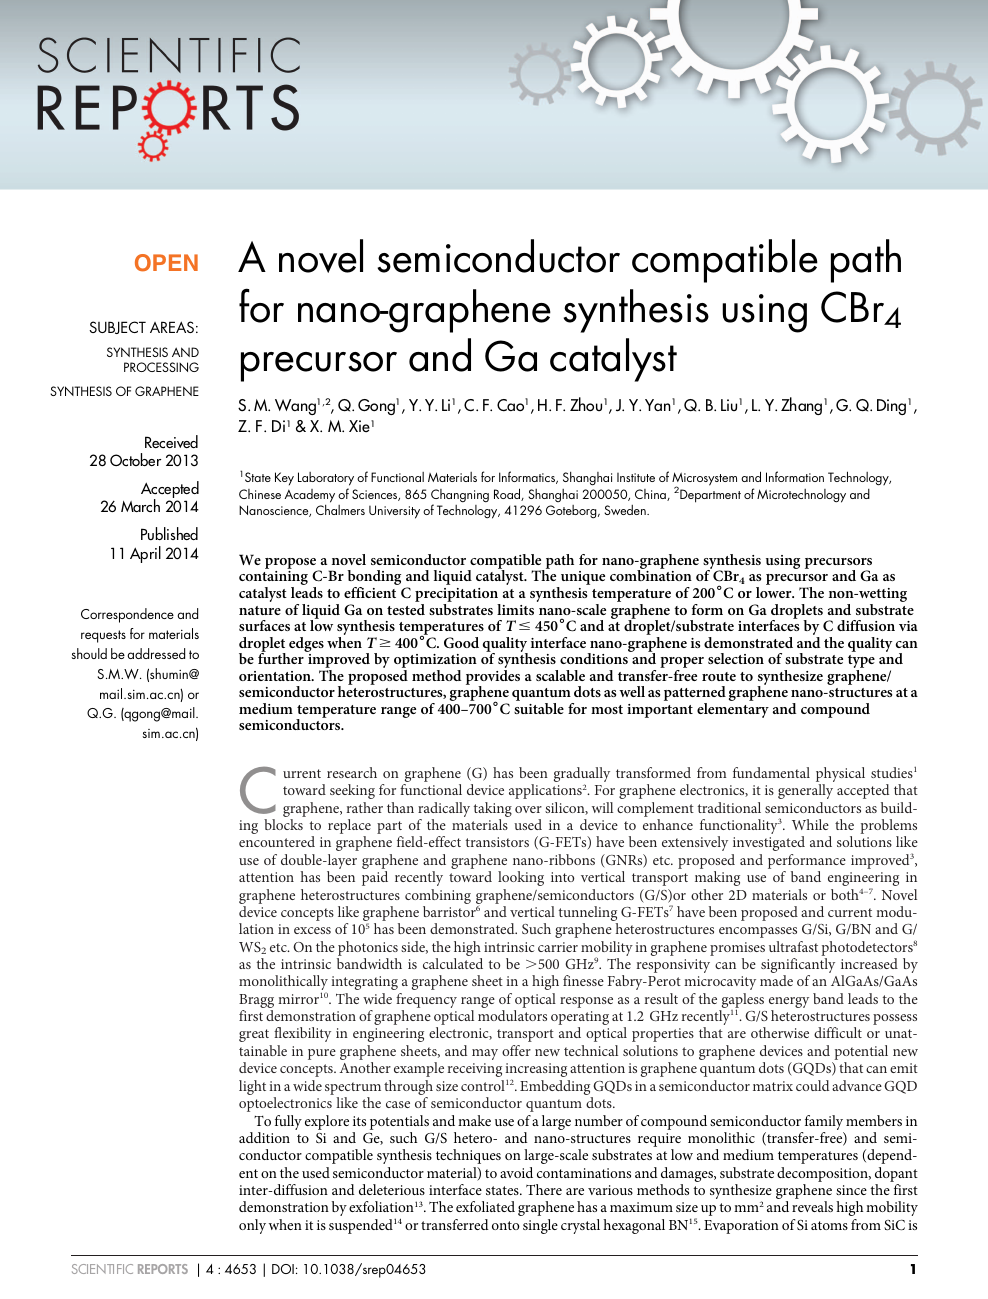 A Novel Semiconductor Compatible Path For Nano Graphene Synthesis Using Cbr4 Precursor And Ga Catalyst Topic Of Research Paper In Nano Technology Download Scholarly Article Pdf And Read For Free On Cyberleninka Open